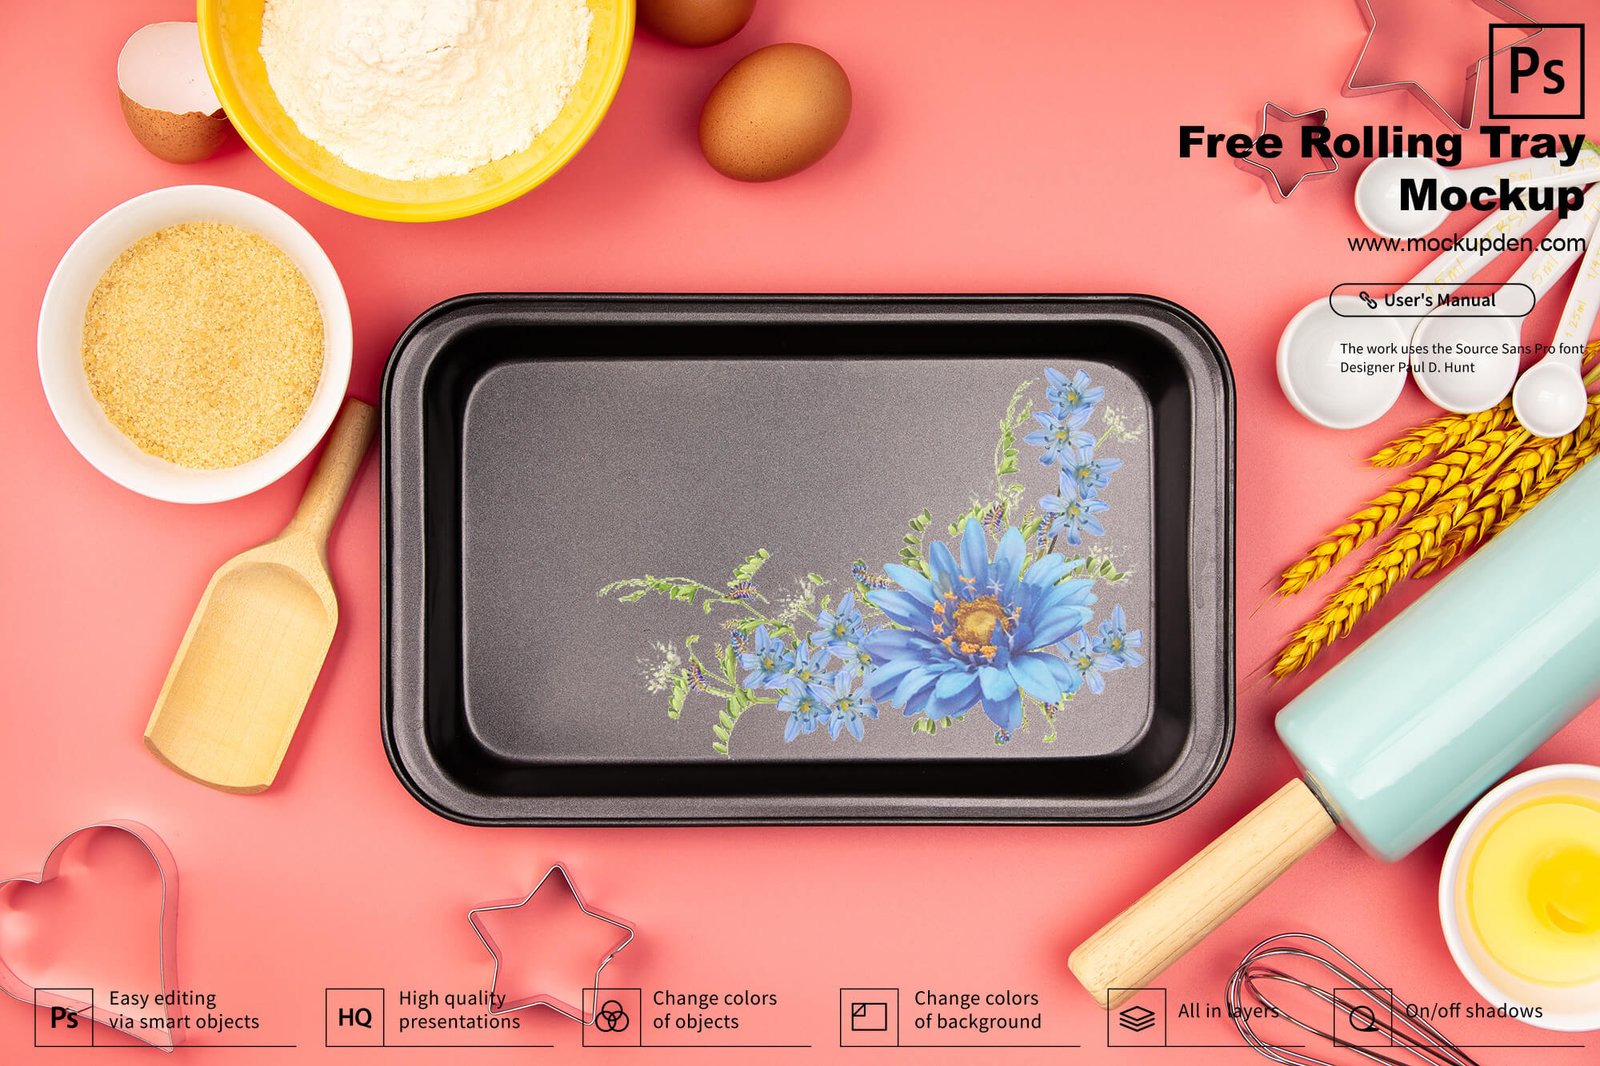 Free Rolling Tray Mockup PSD Template